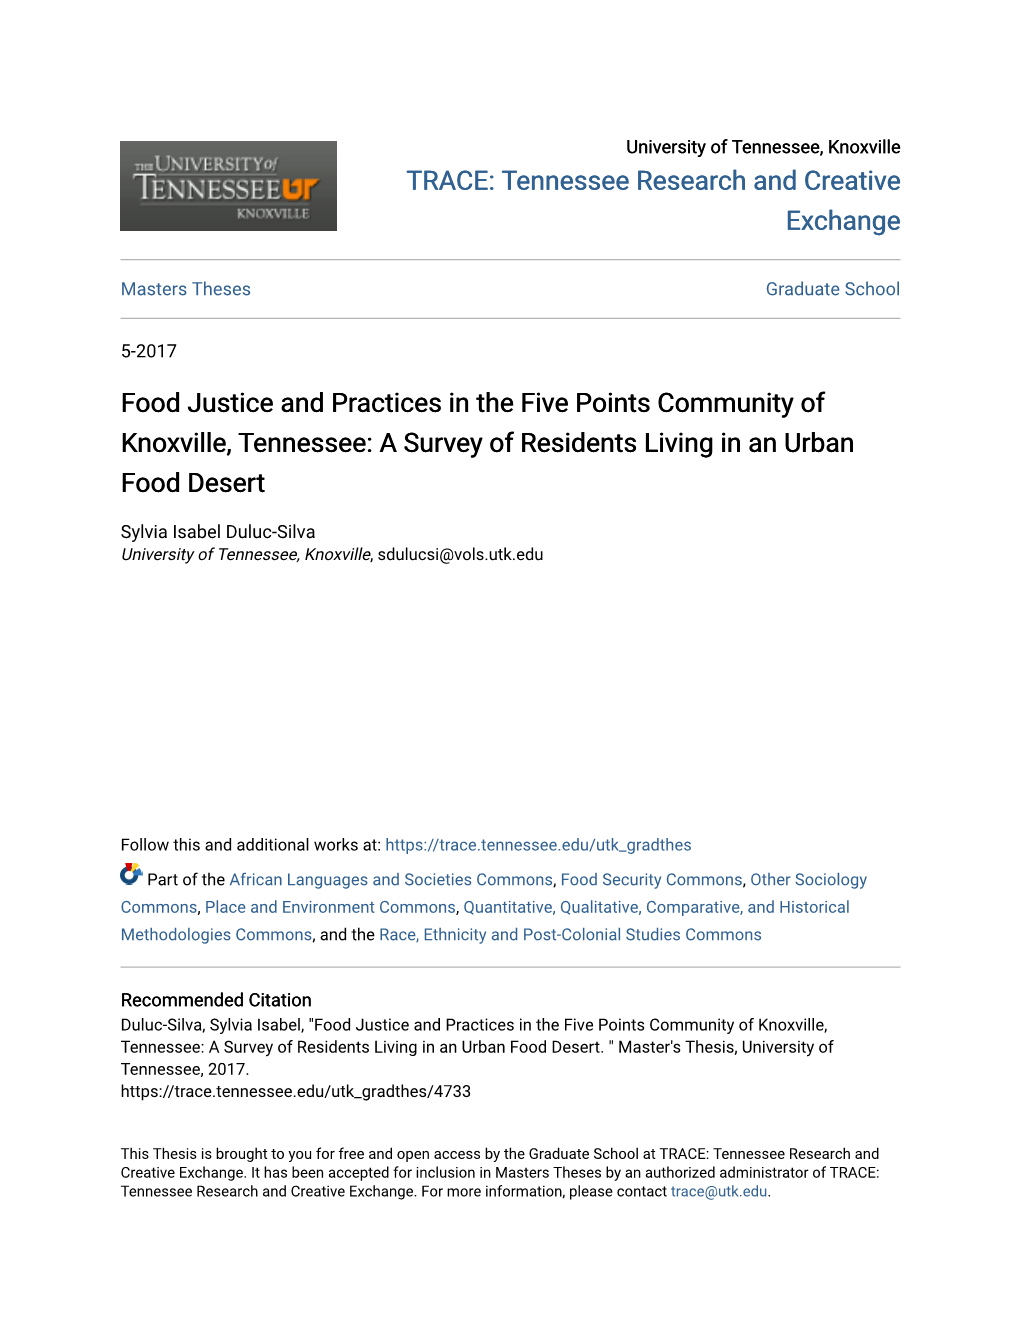 Food Justice and Practices in the Five Points Community of Knoxville, Tennessee: a Survey of Residents Living in an Urban Food Desert